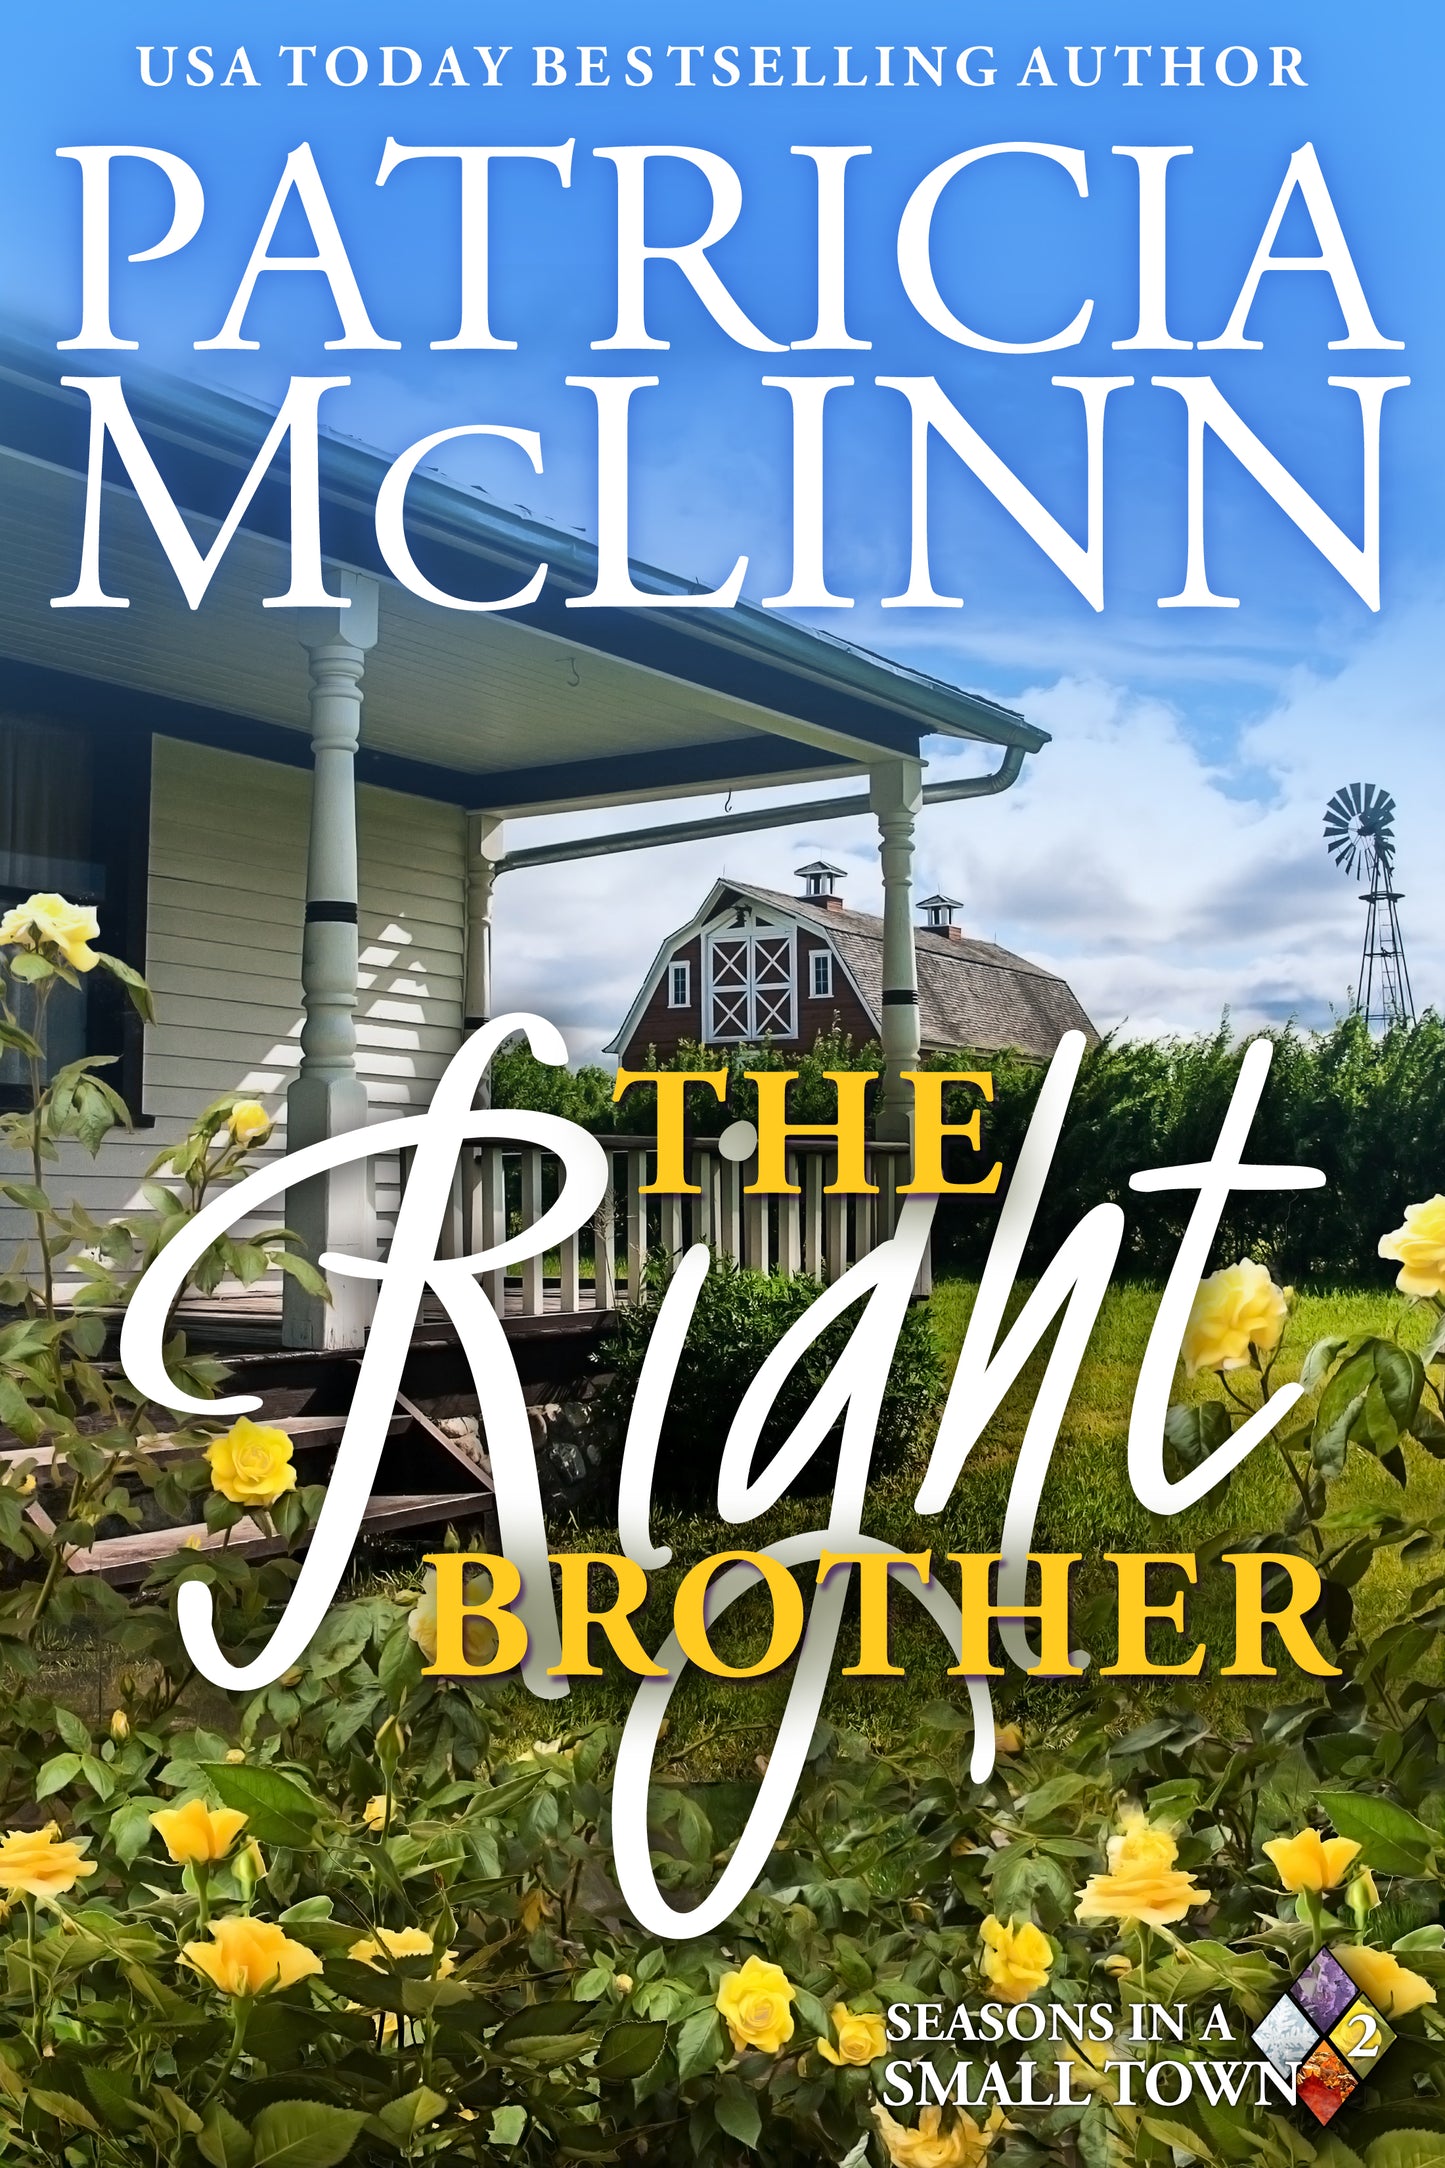 The Right Brother - Patricia McLinn